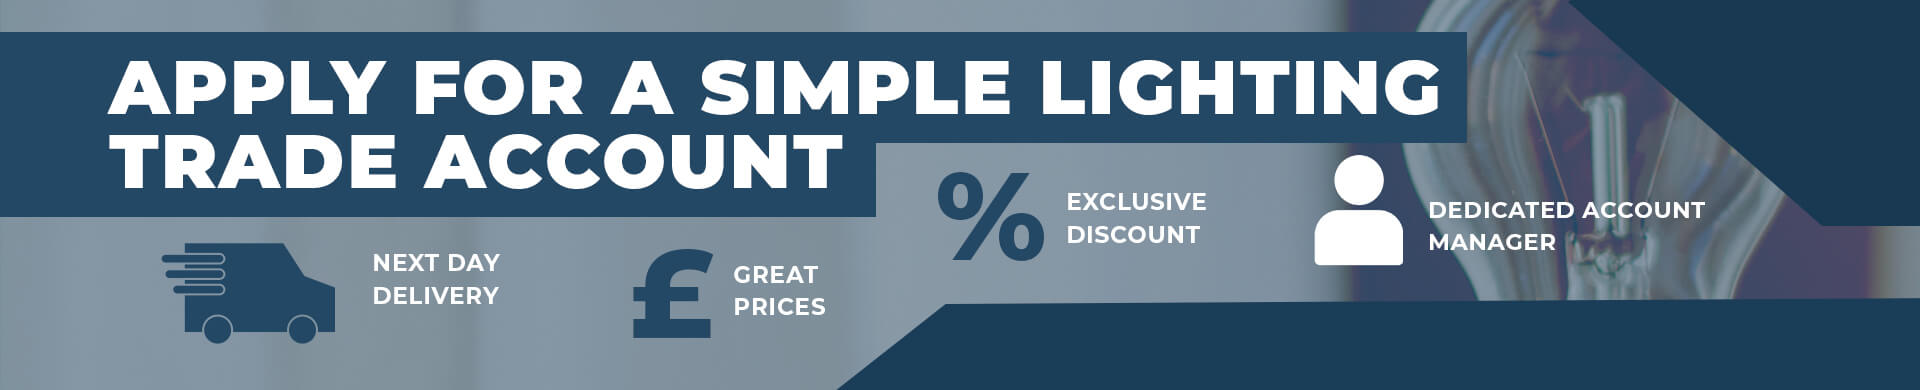 Sign up for a simple lighting trade account for exclusive discounts